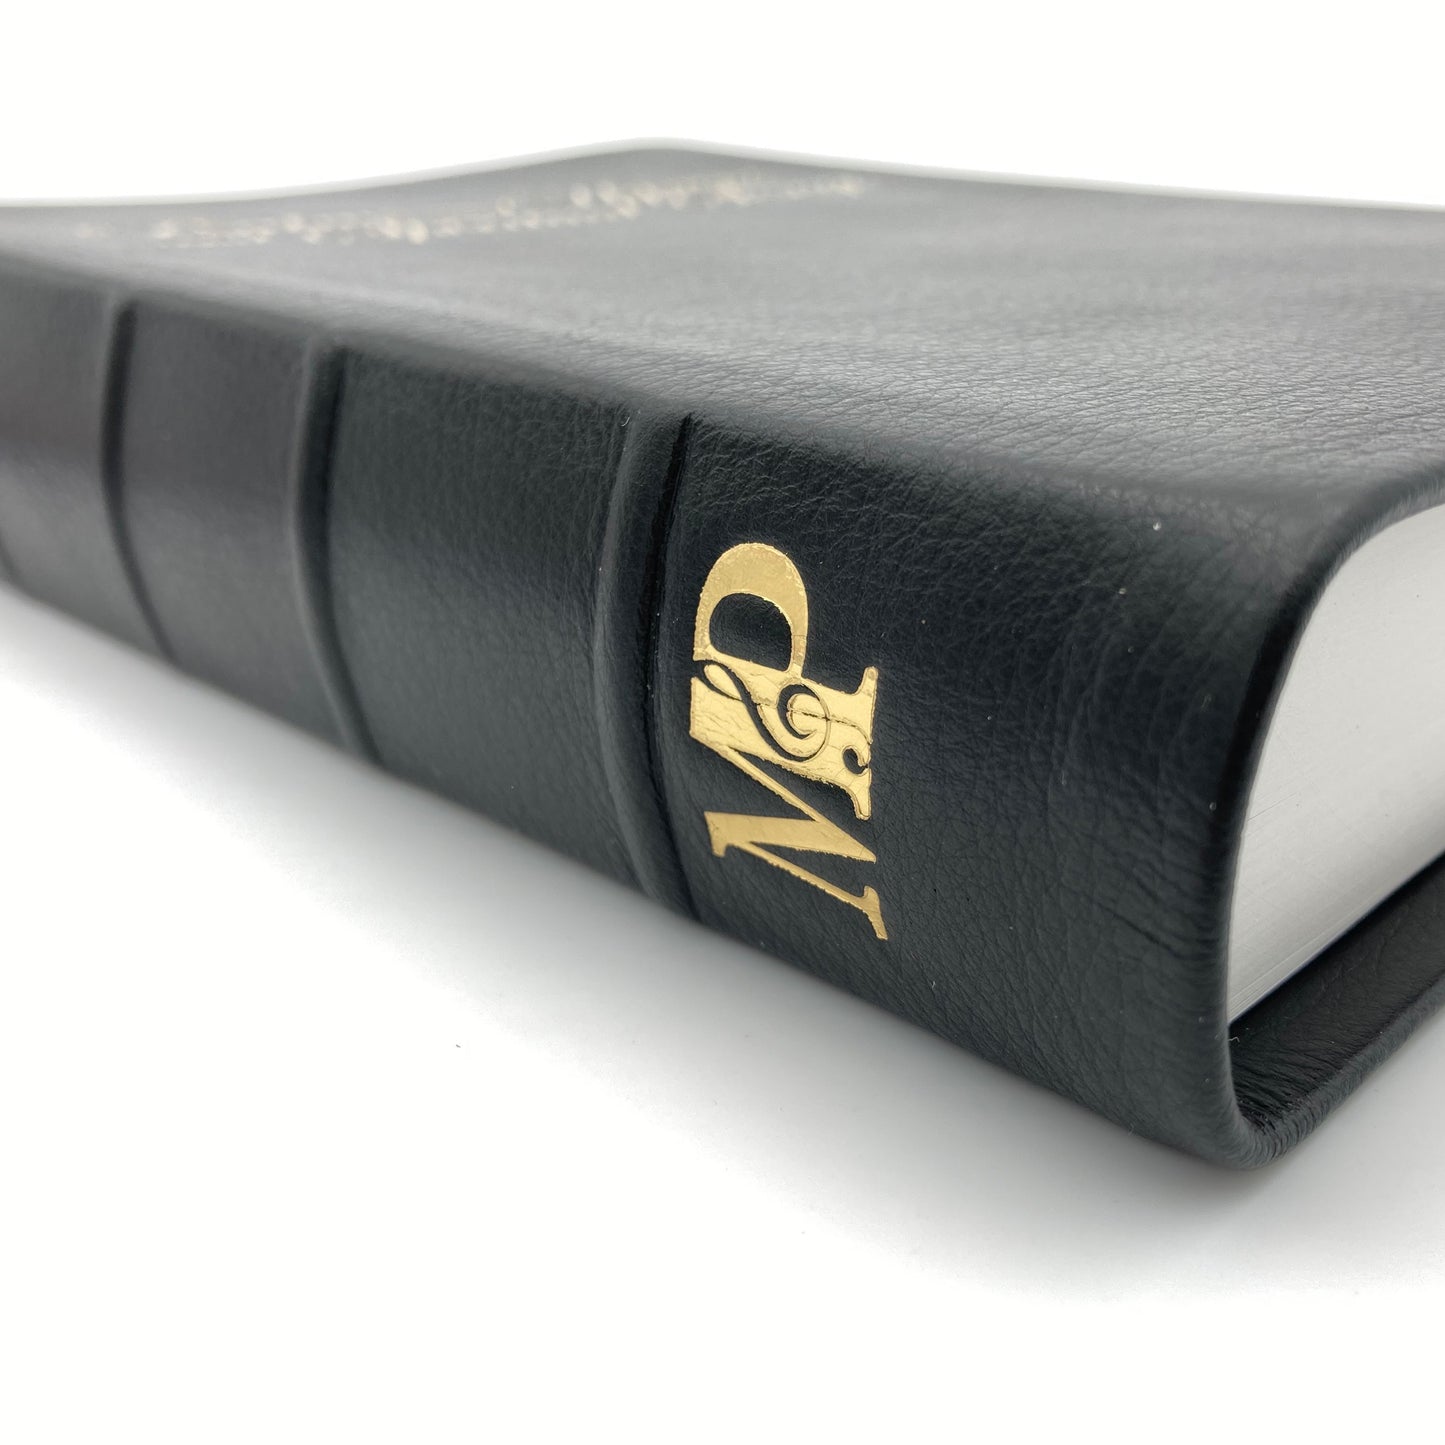 Psalms and Hymns and Spiritual Songs - Leather Edition